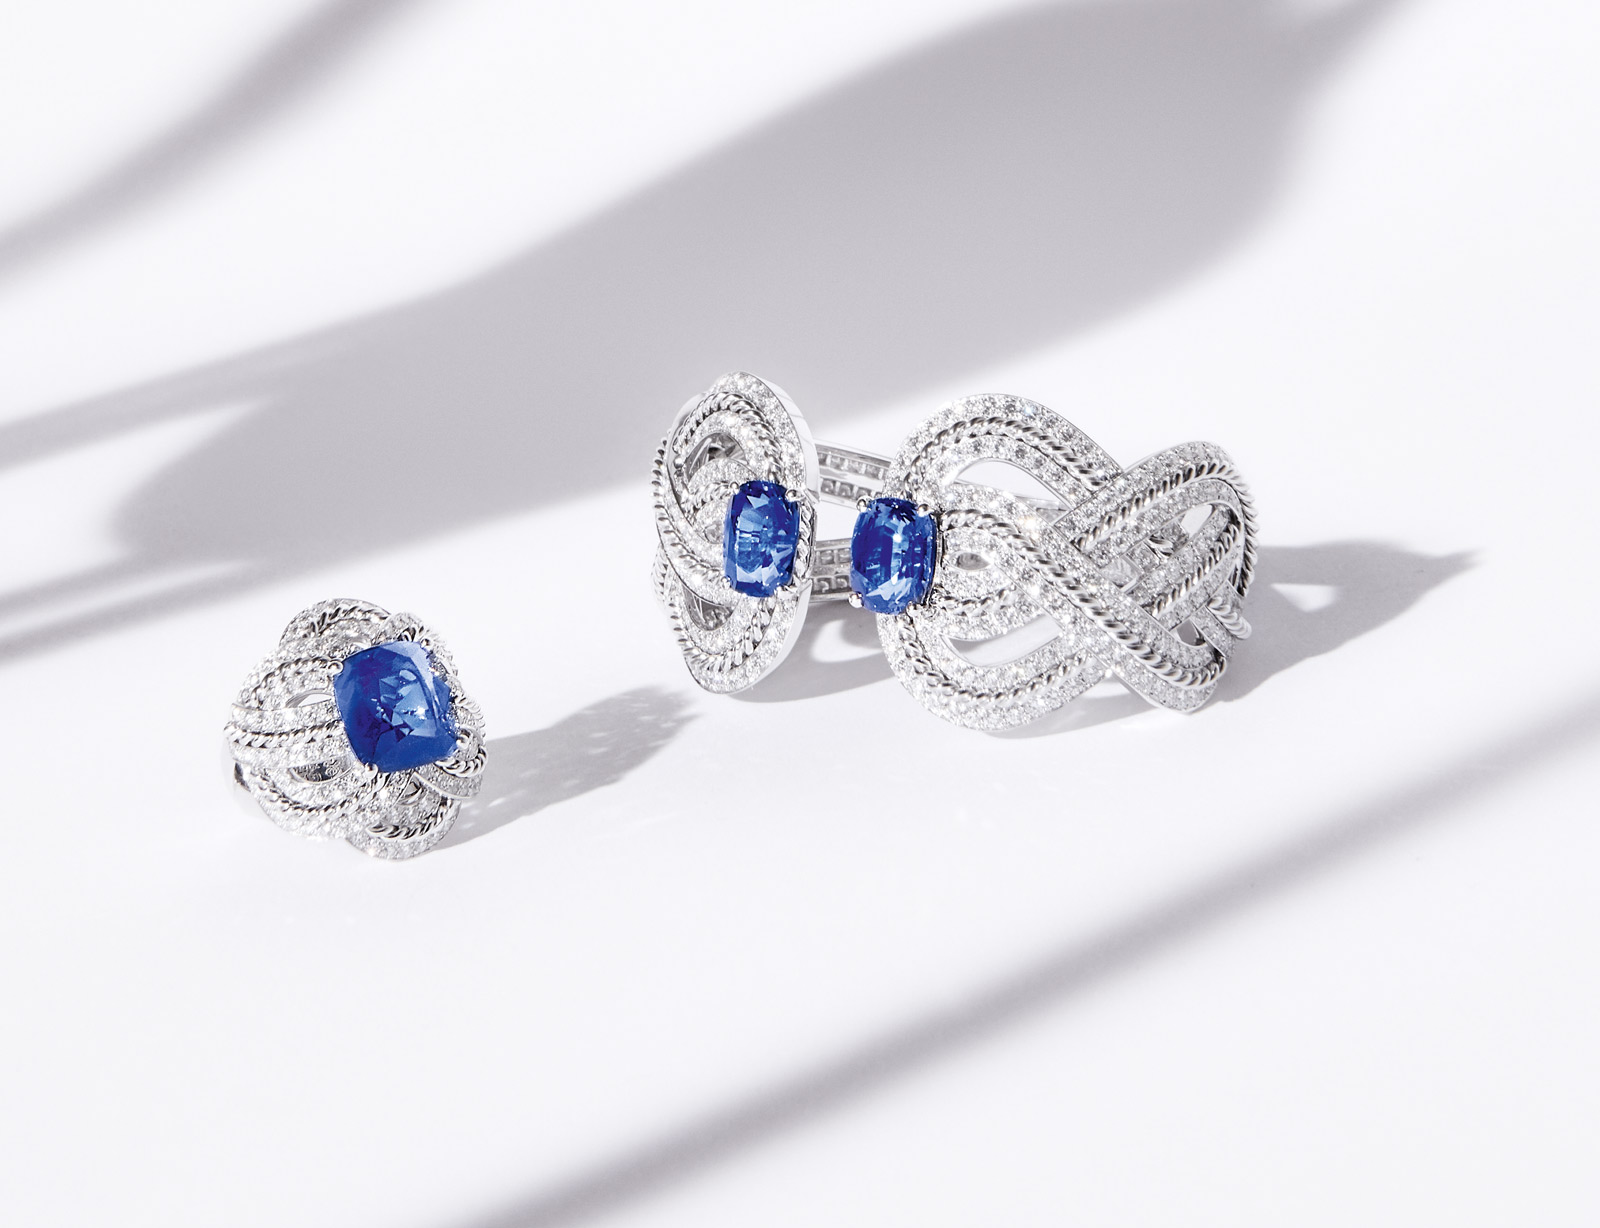 Chanel: a route to new jewellery horizons in the Flying Cloud collection